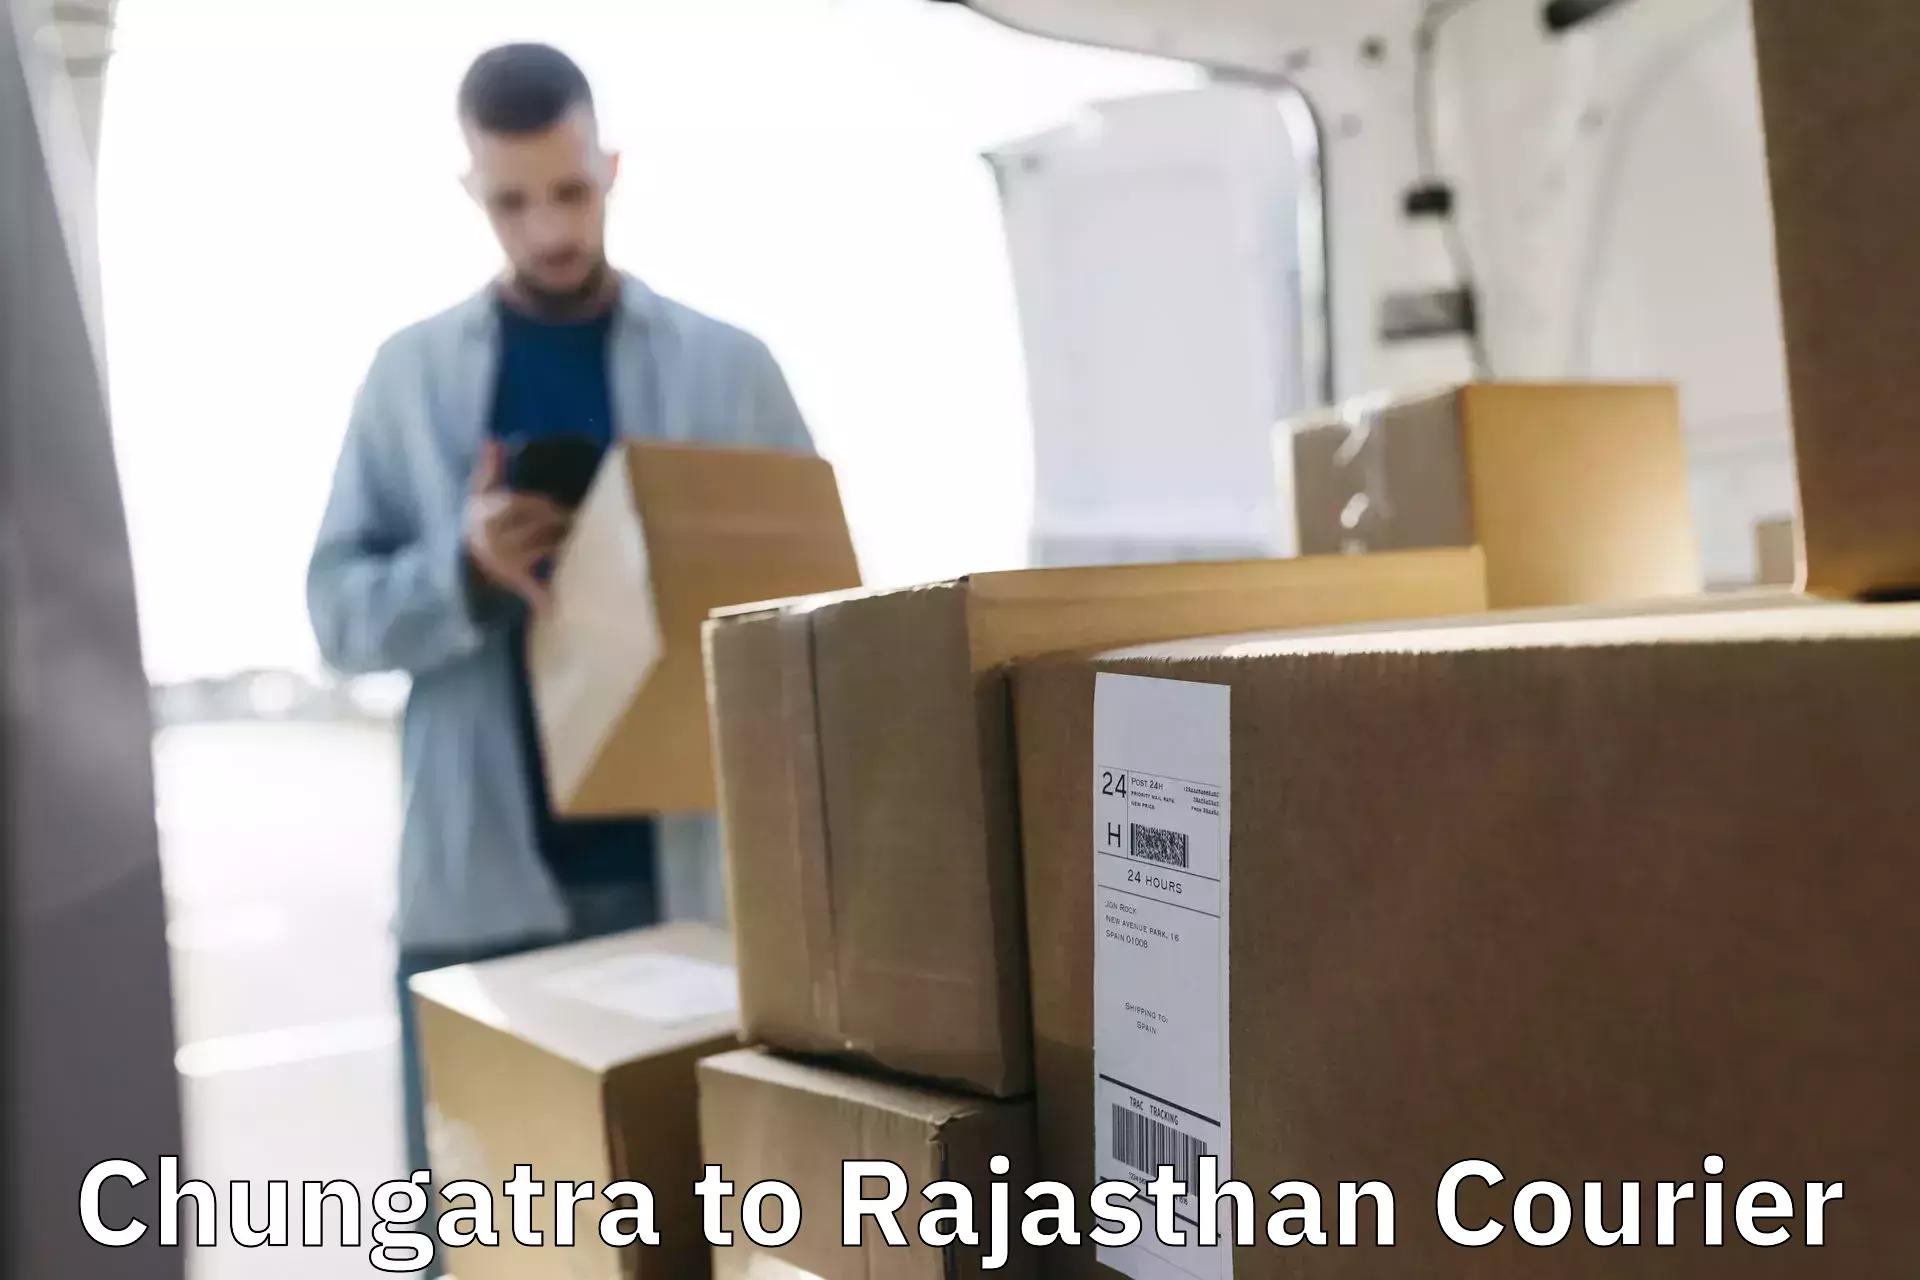 Nationwide parcel services Chungatra to Laxmangarh